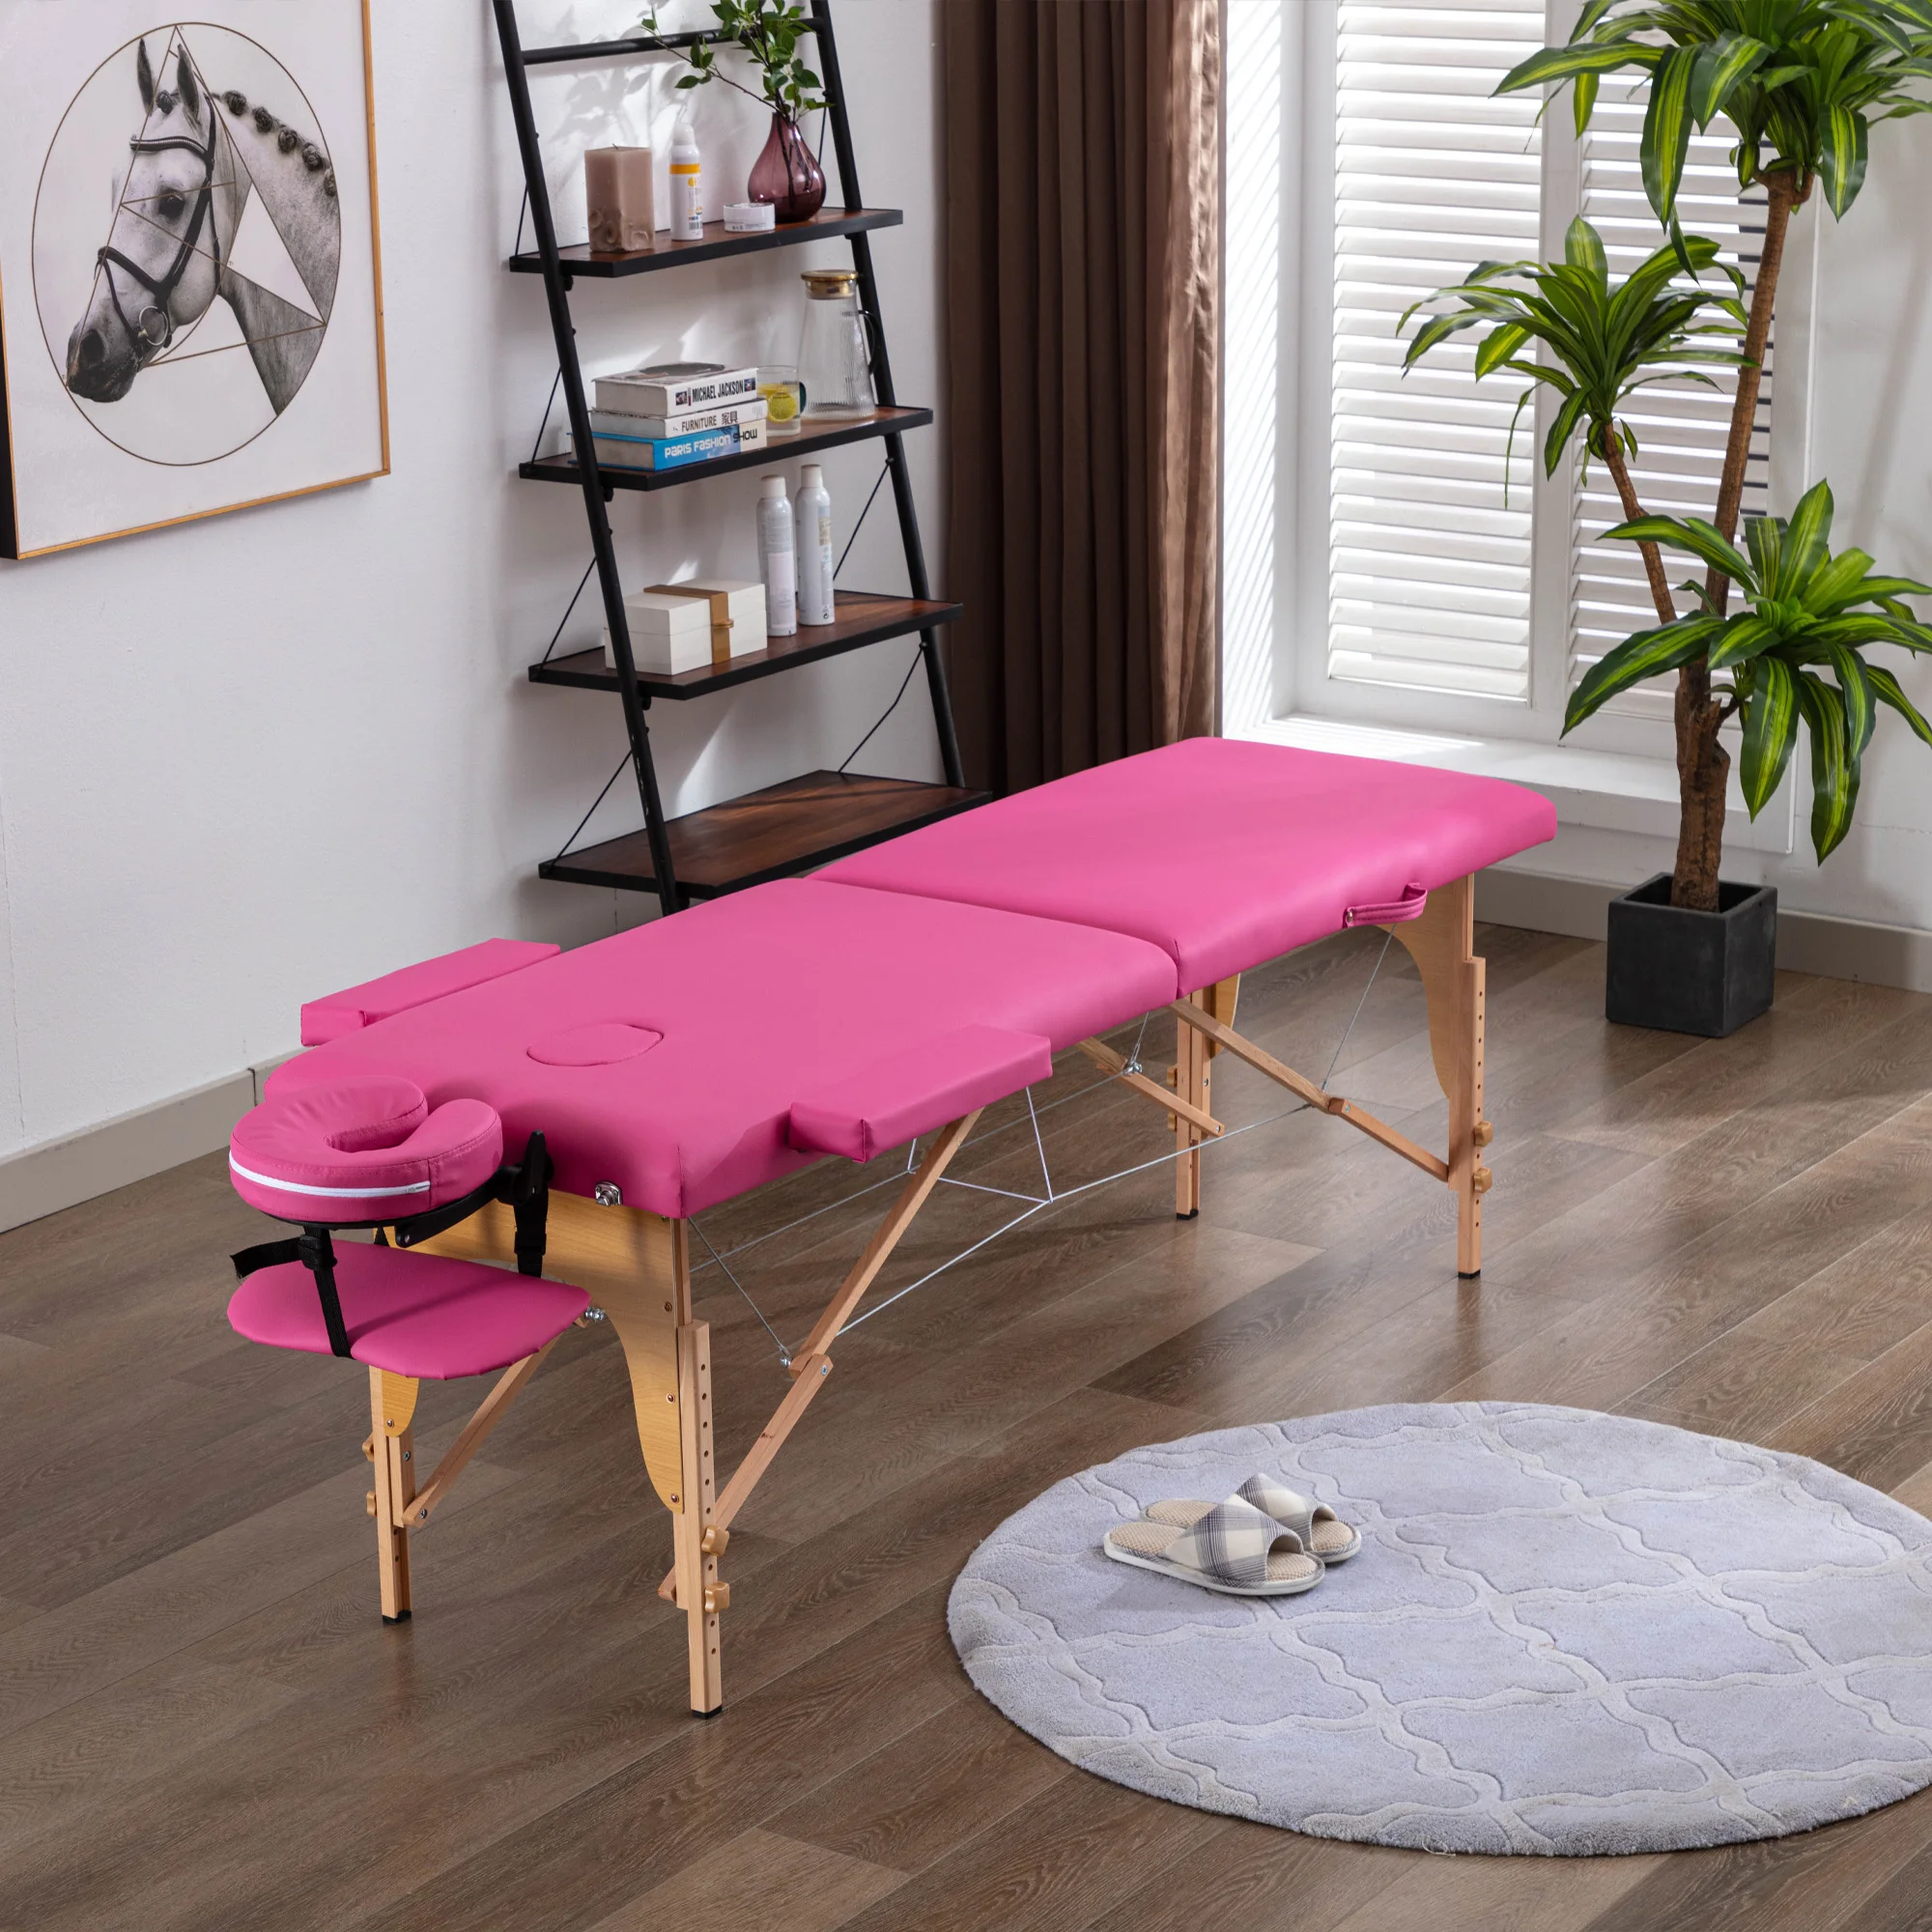 

2 Section Massage Table Portable Massage Bed Lash Bed Facial Table Reiki Table SPA Beds for Esthetician Portable Height Adjustab